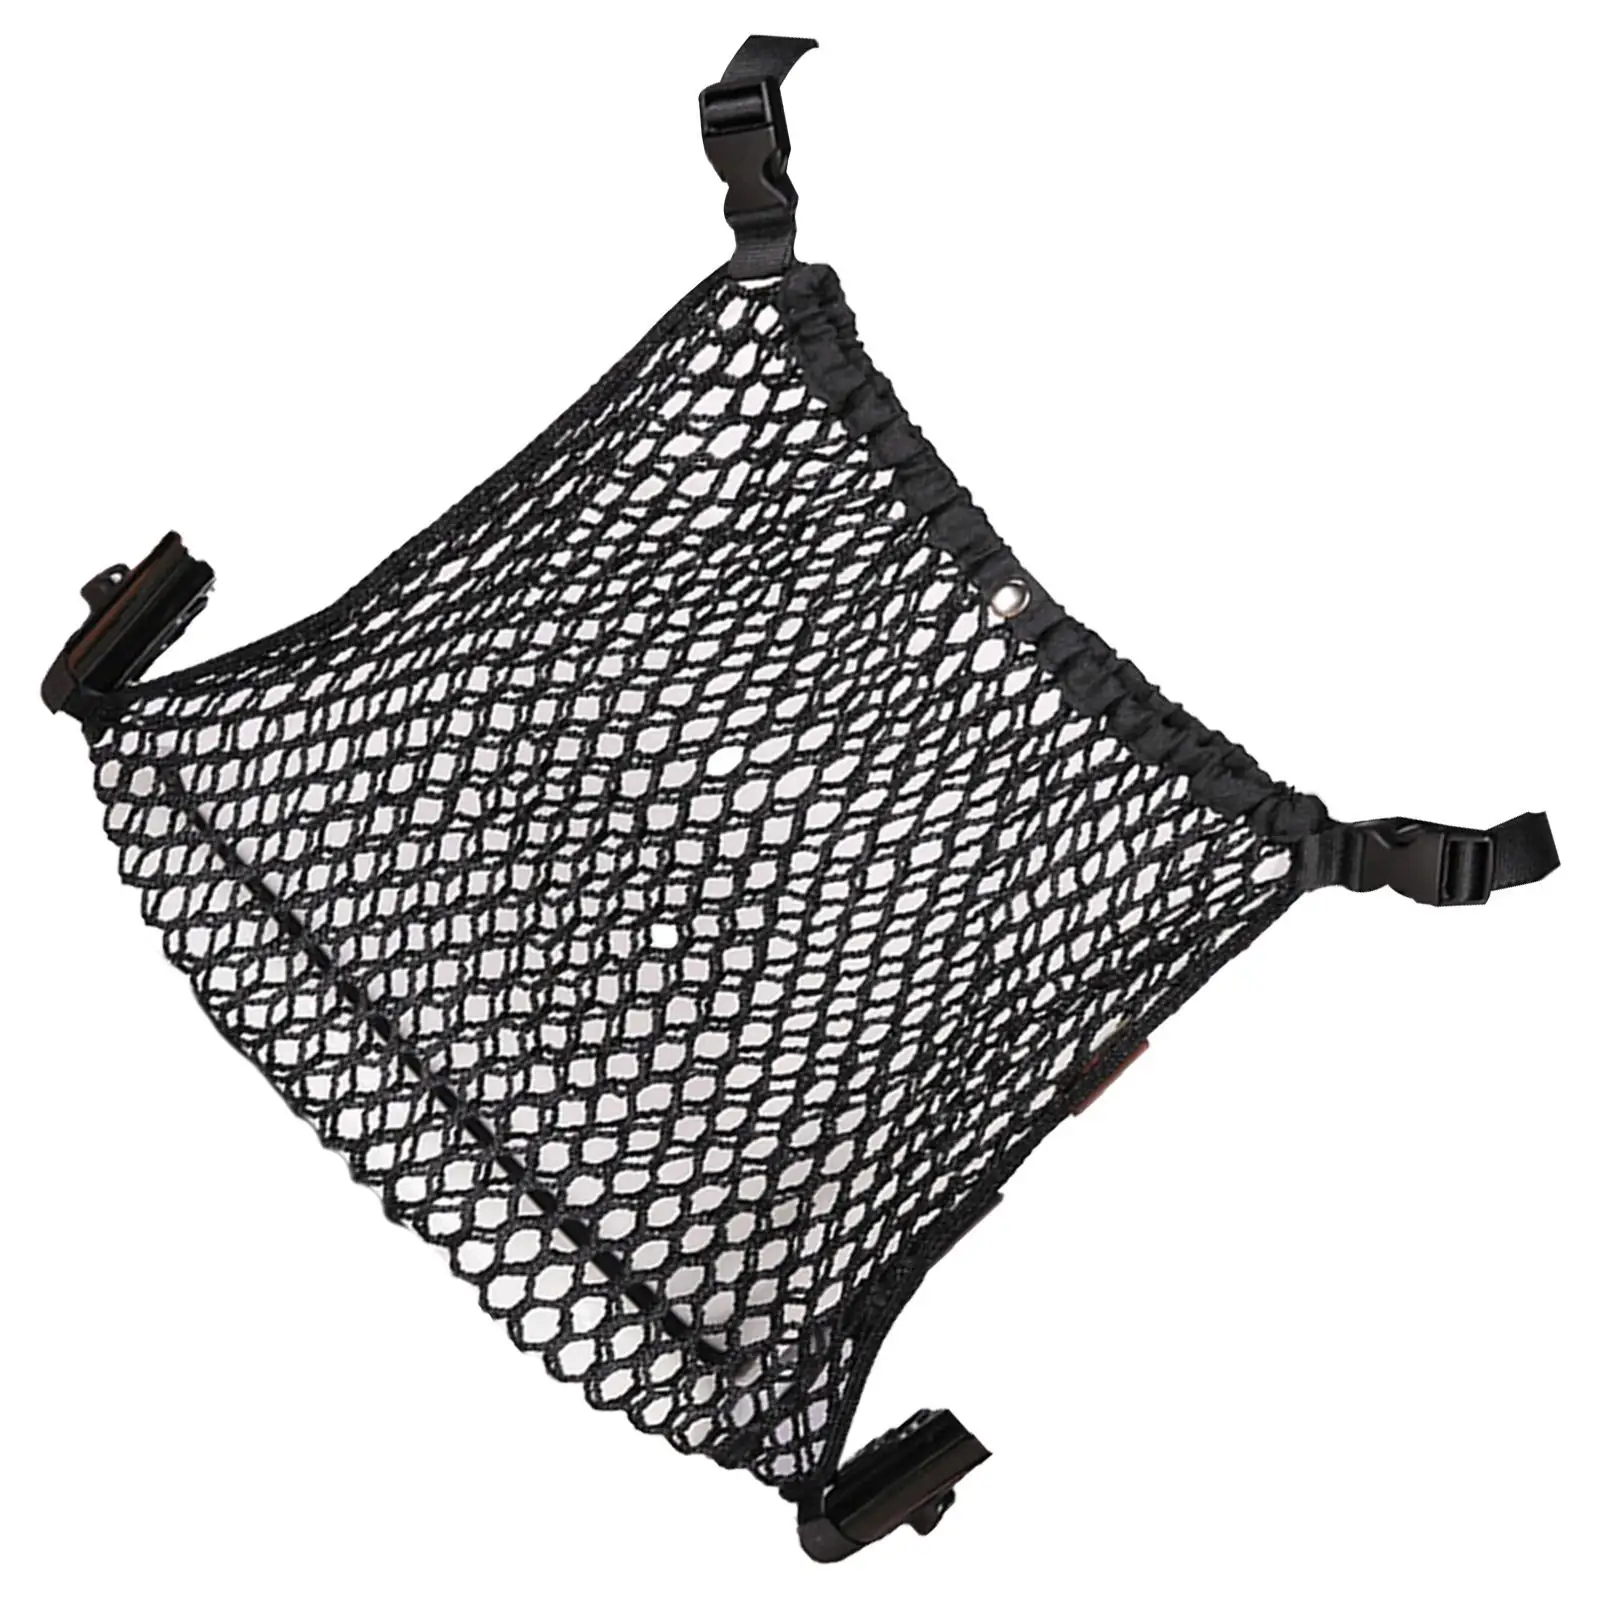 Universal Baby Stroller Net Pocket Portable for Water Cups Carrying Diaper